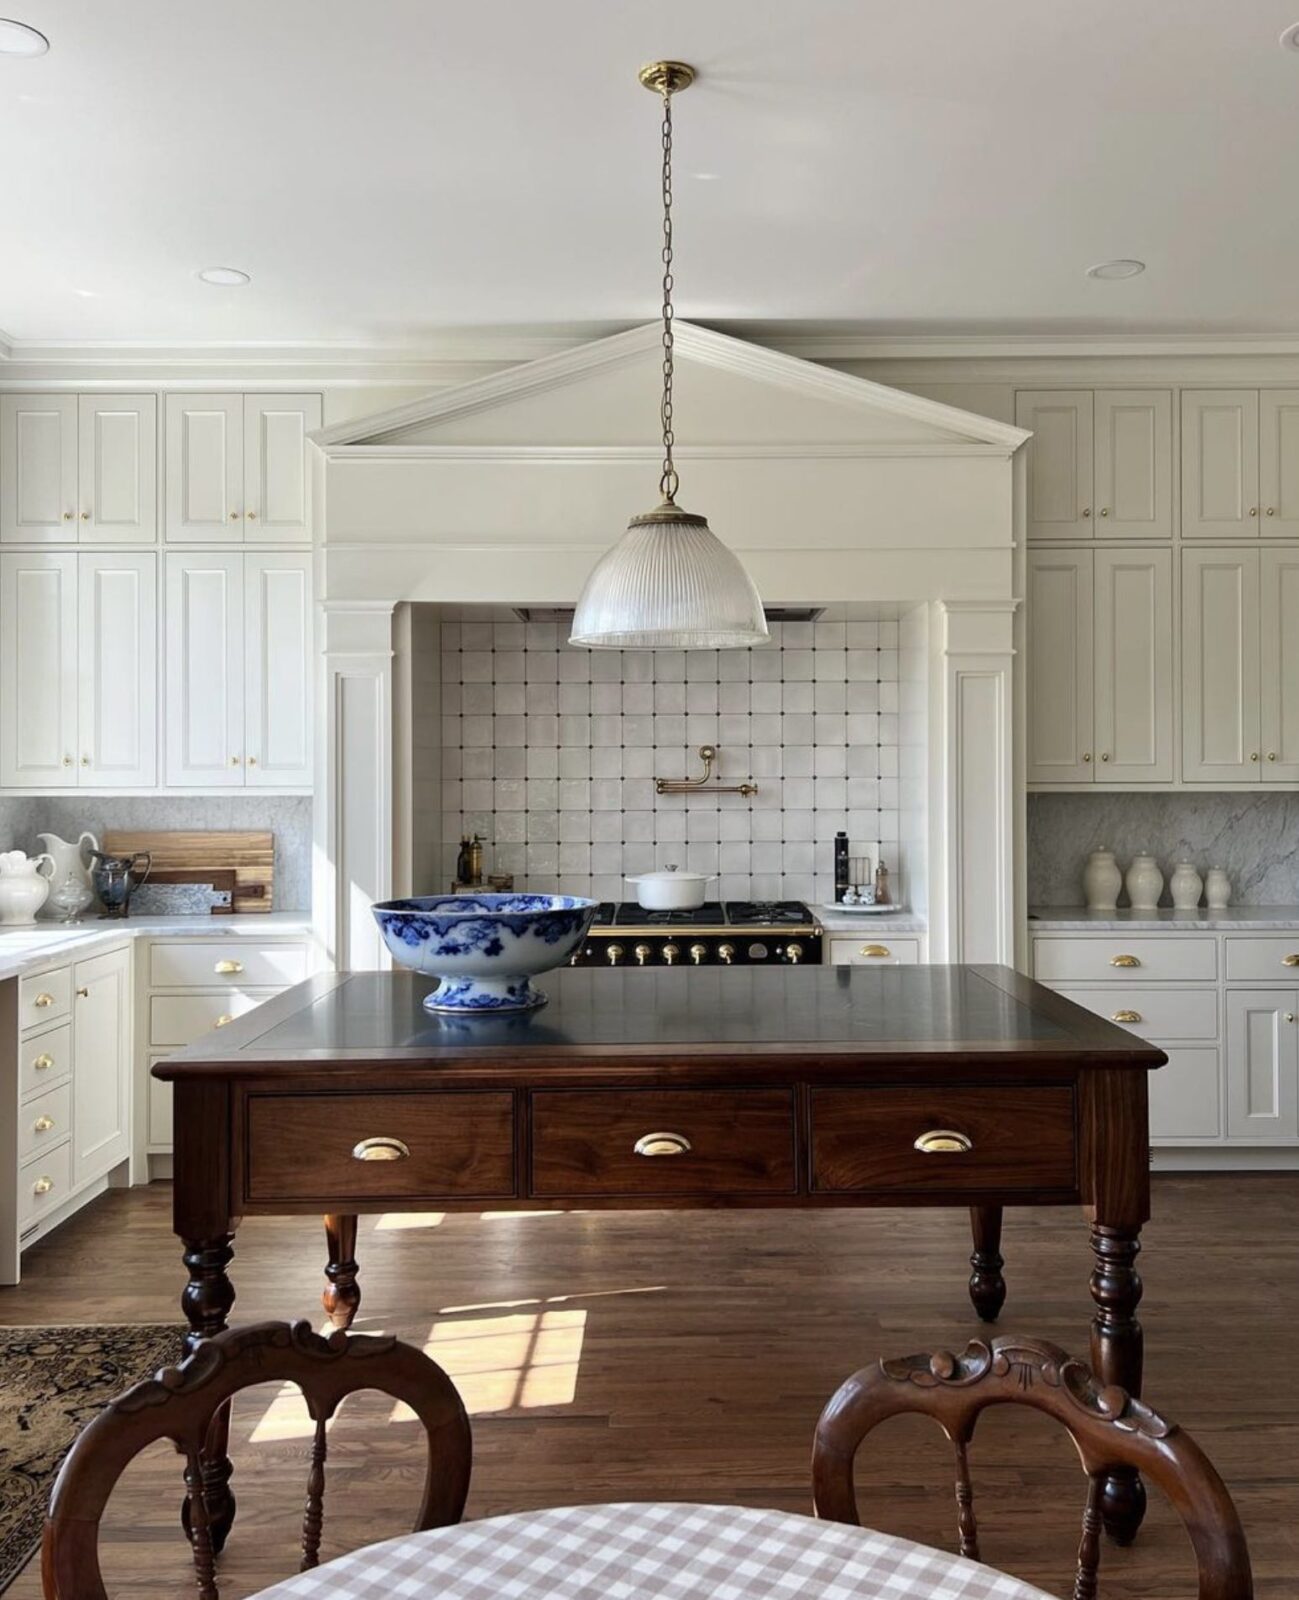 White kitchen with marble countertops, wood floors, and an antique wood island